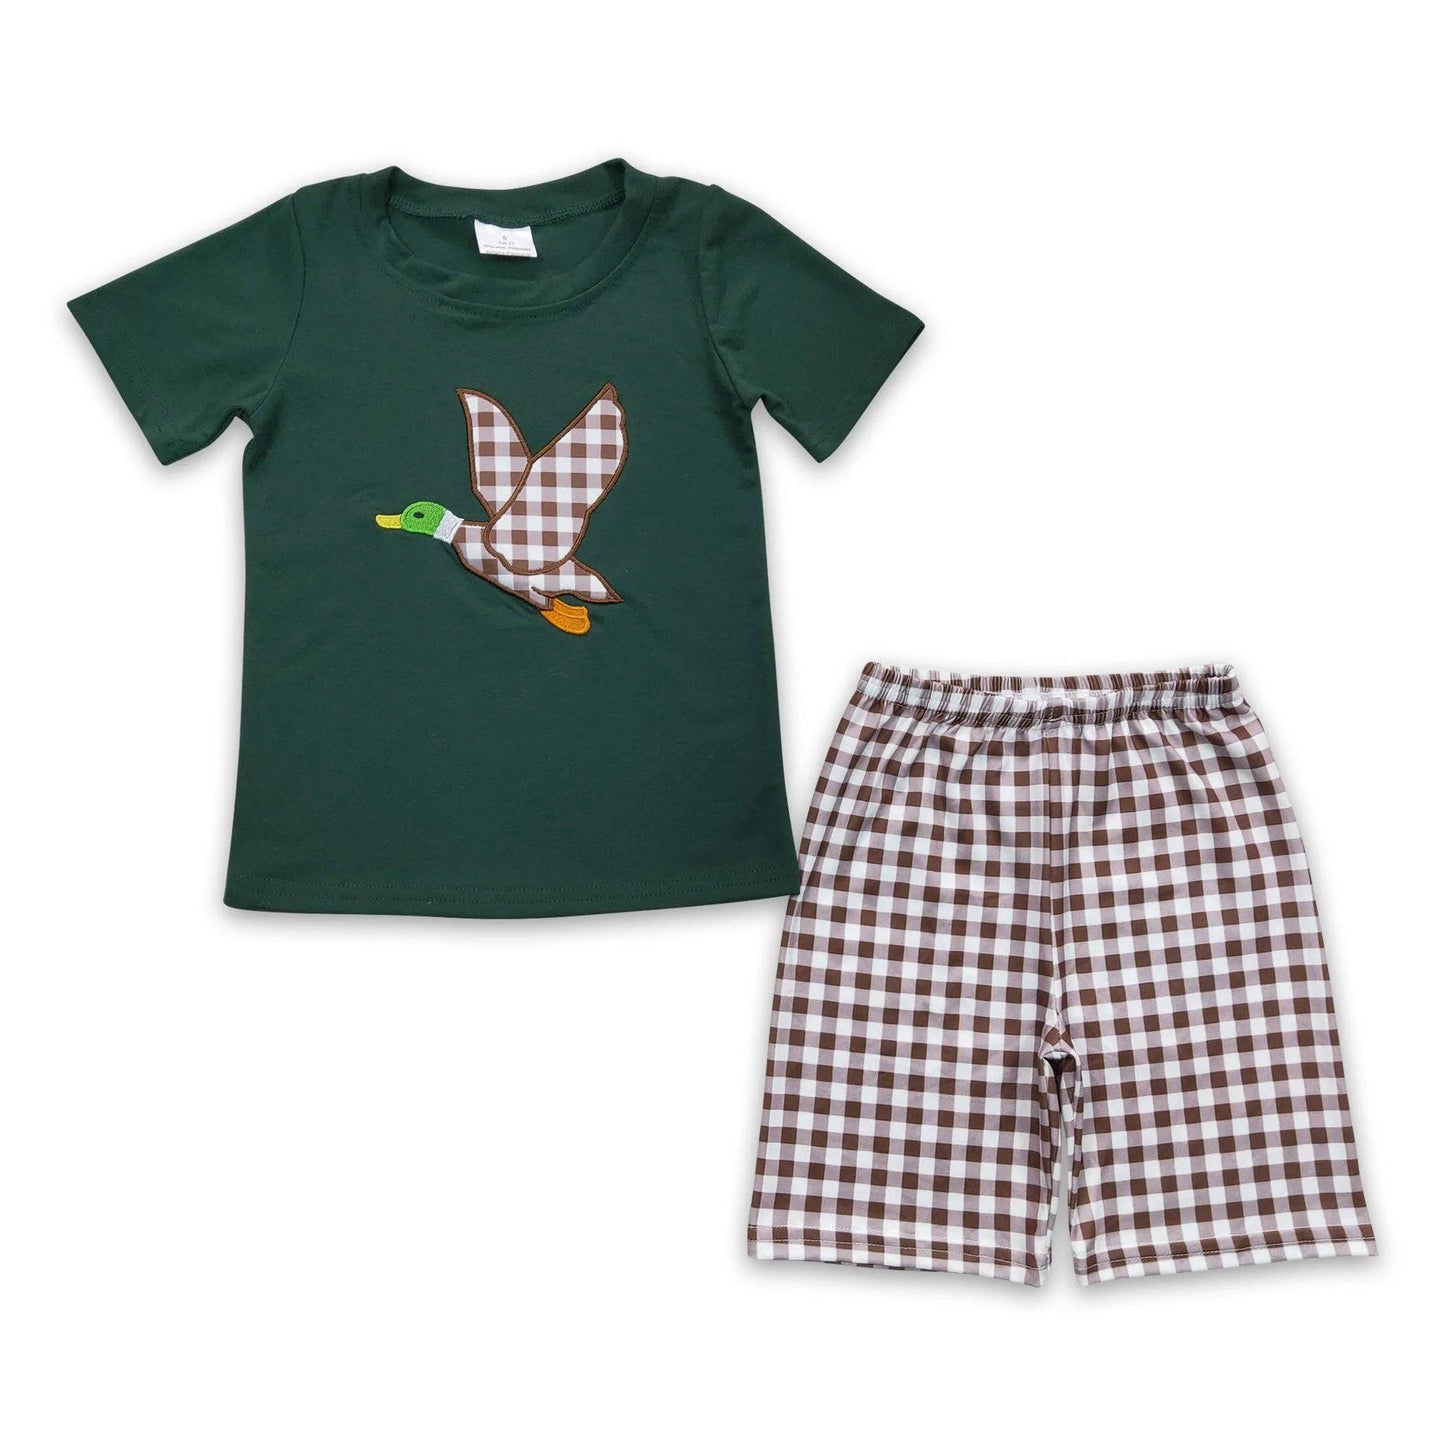 A Yawoo Garments duck embroidery cotton shirt brown shorts boy outfits with a duck on it.